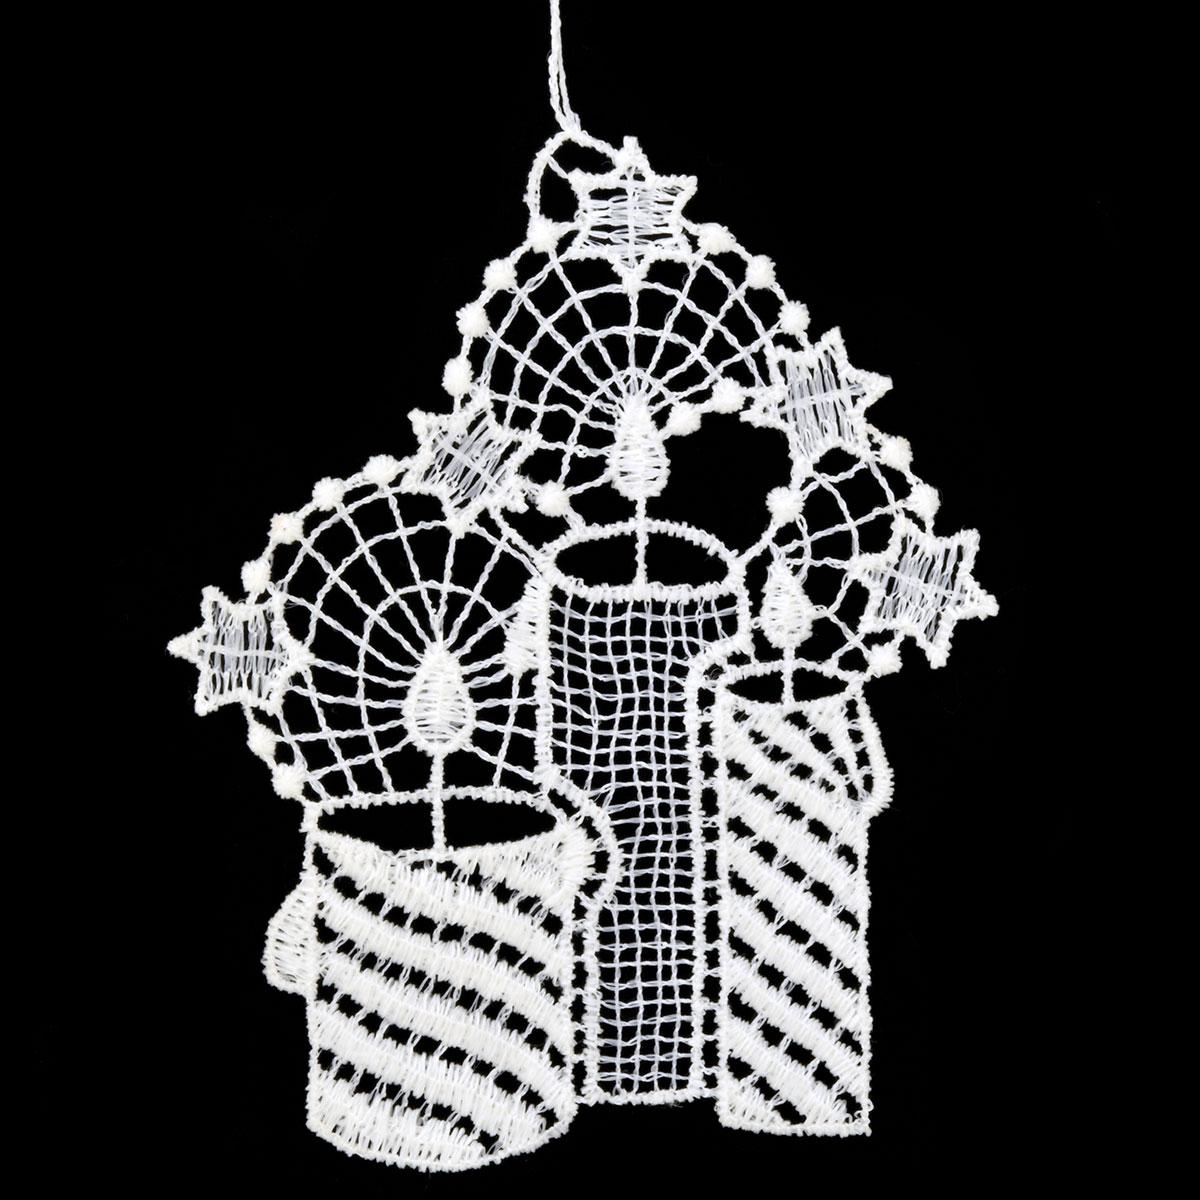 Stitched Lace Candles Ornament